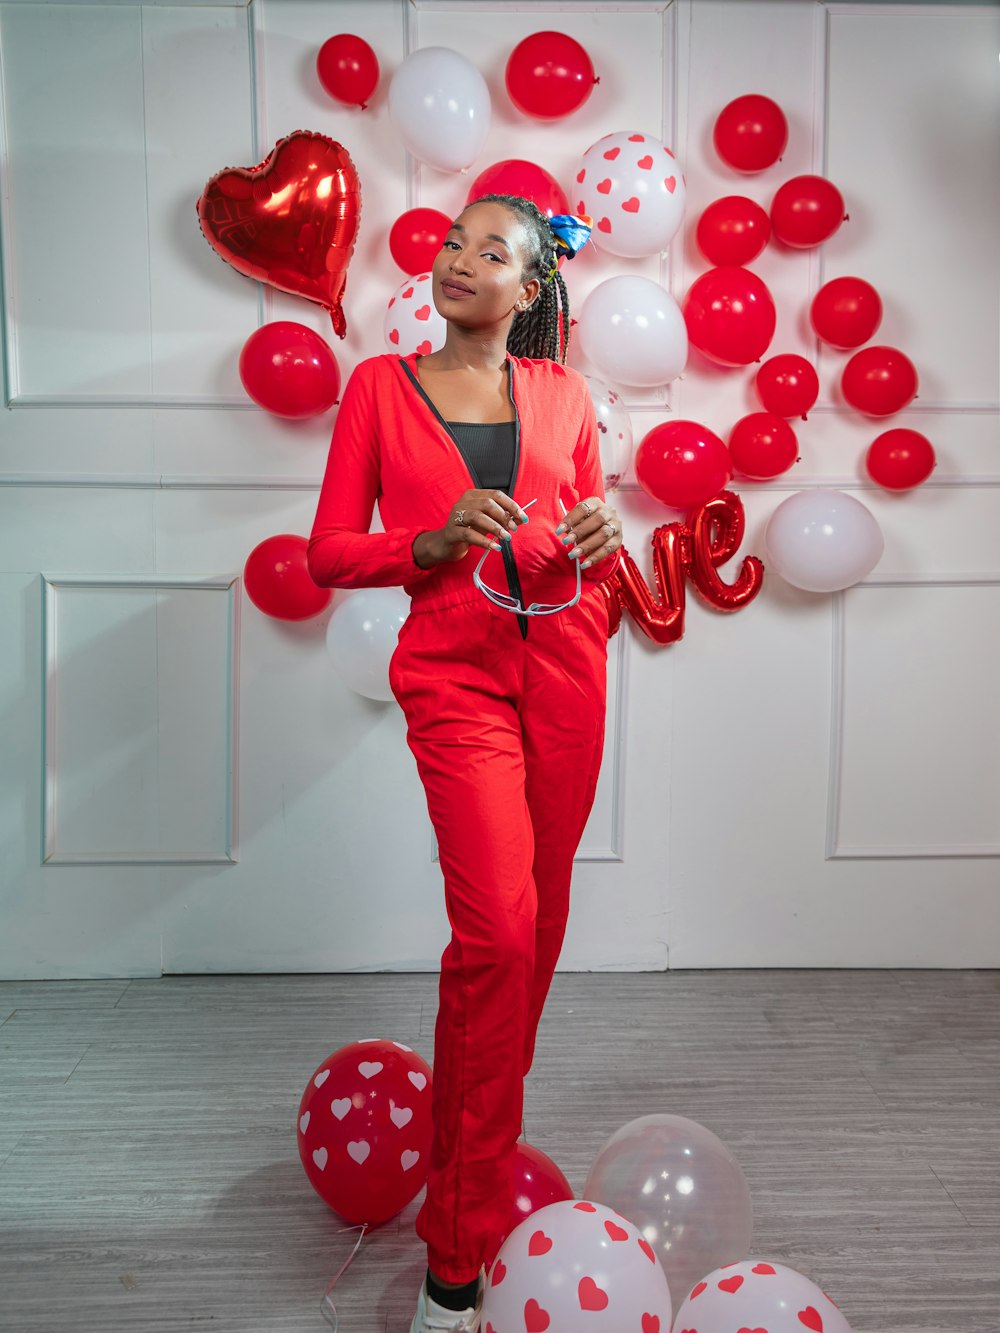 a woman standing in front of balloons and balloons